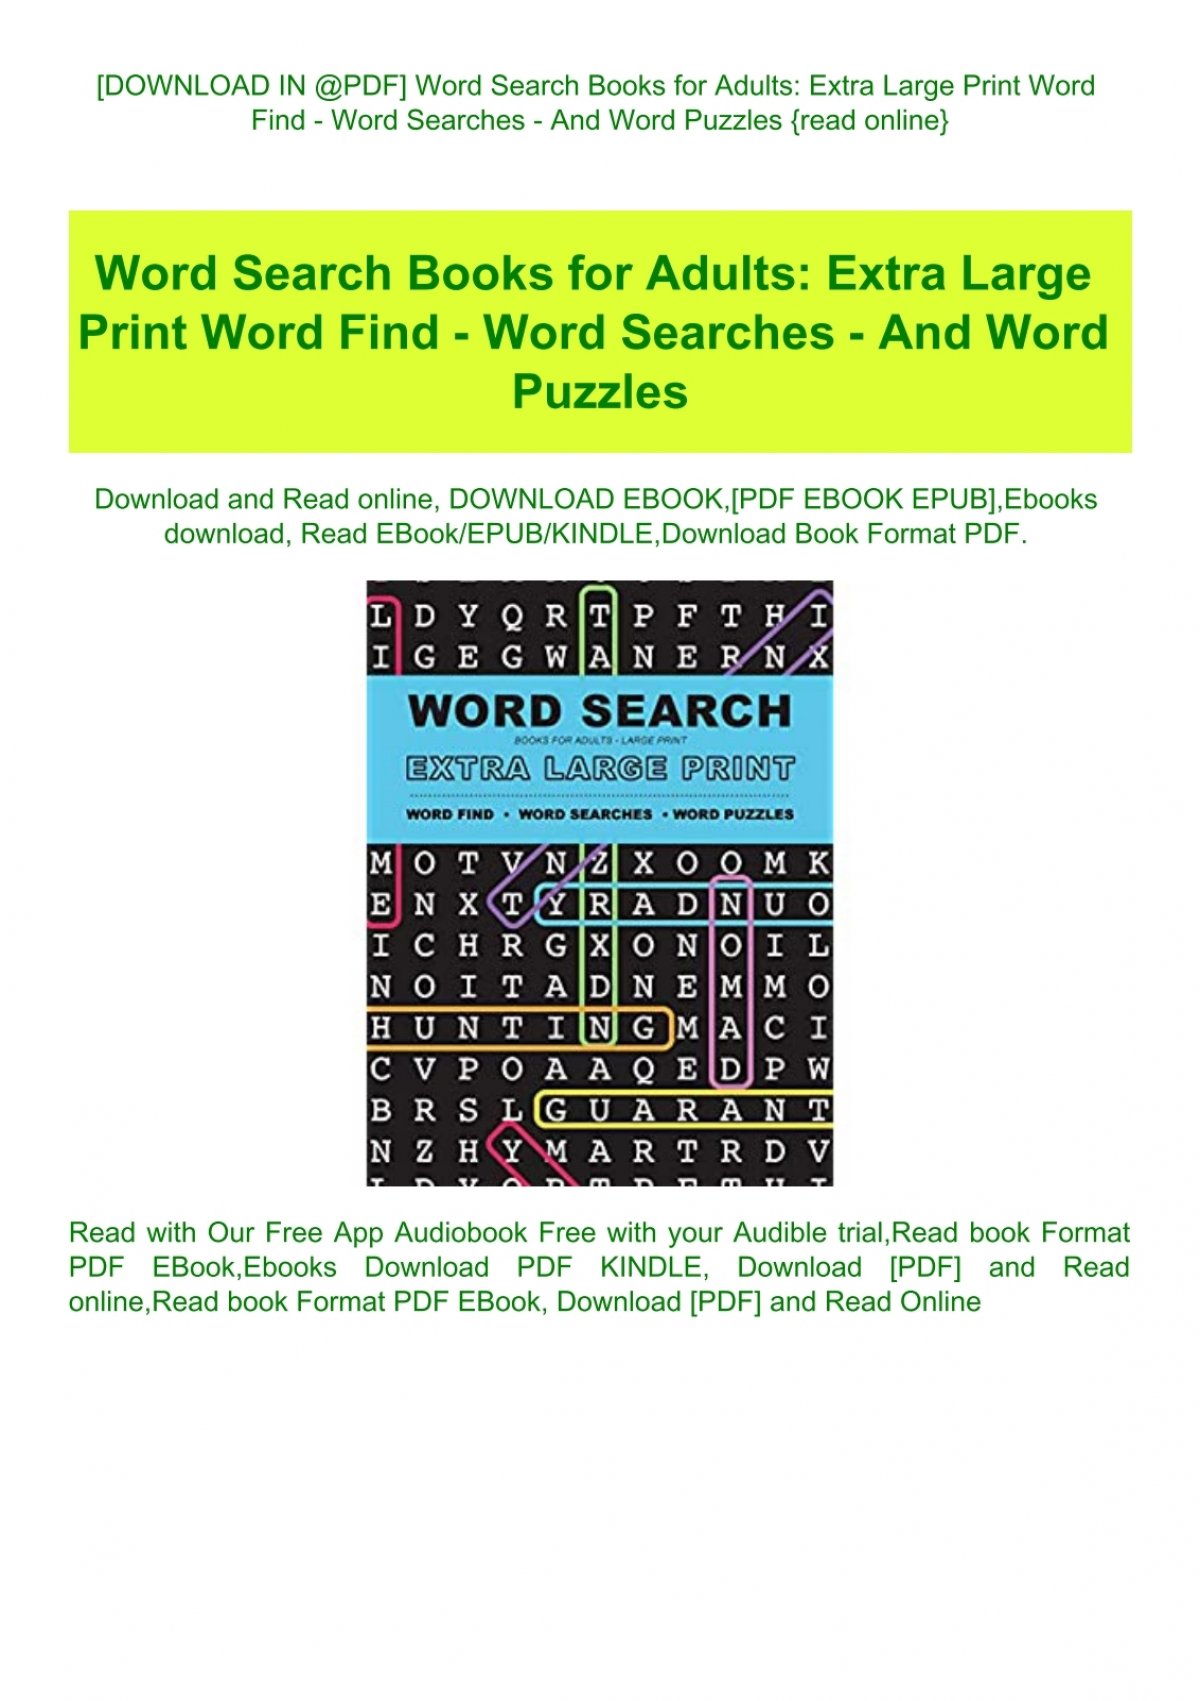 Free Printable Word Search Books For Adults